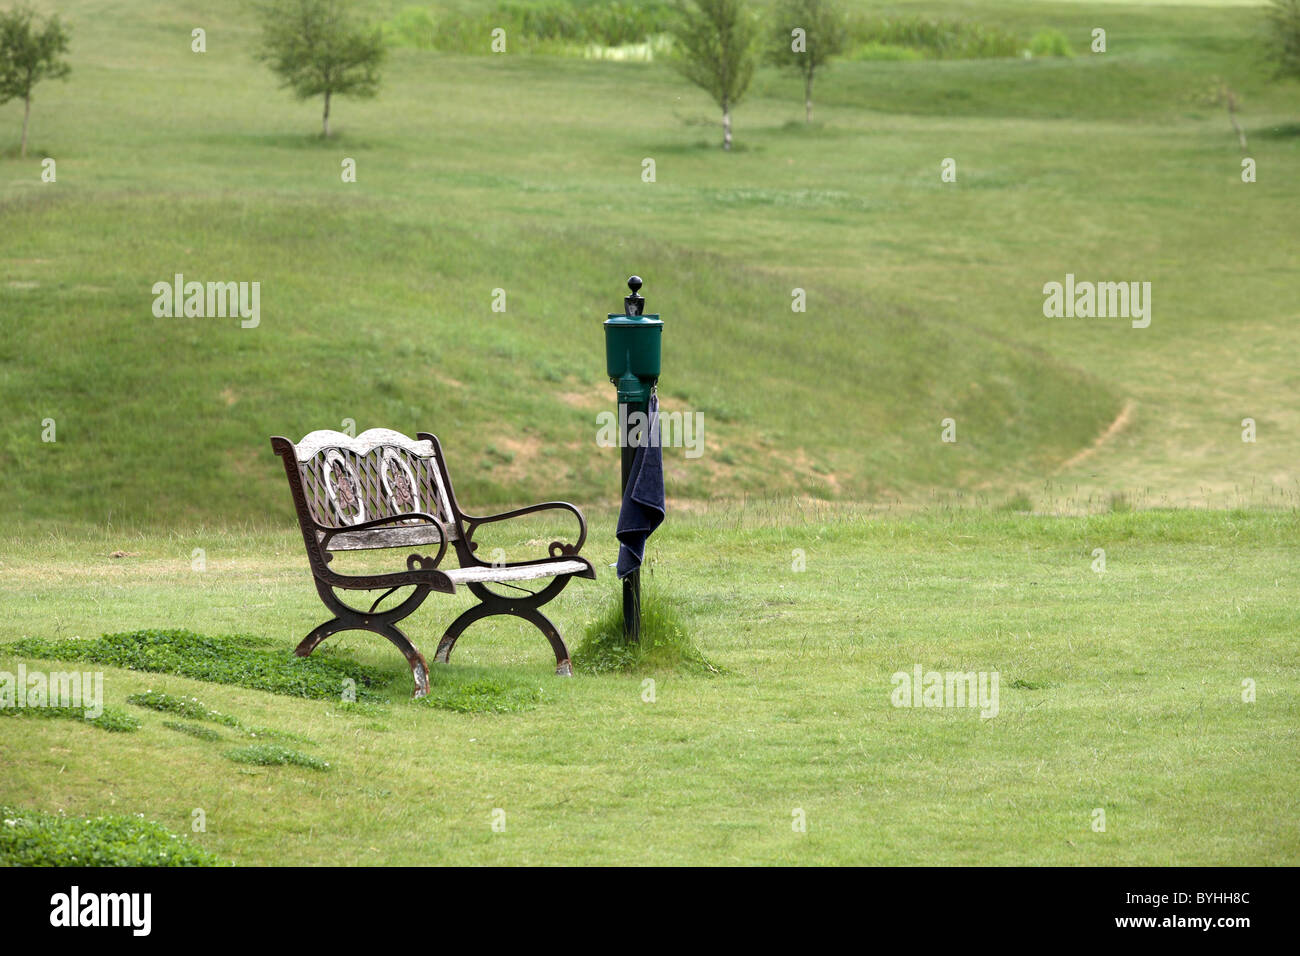 Bench on golf  course Stock Photo